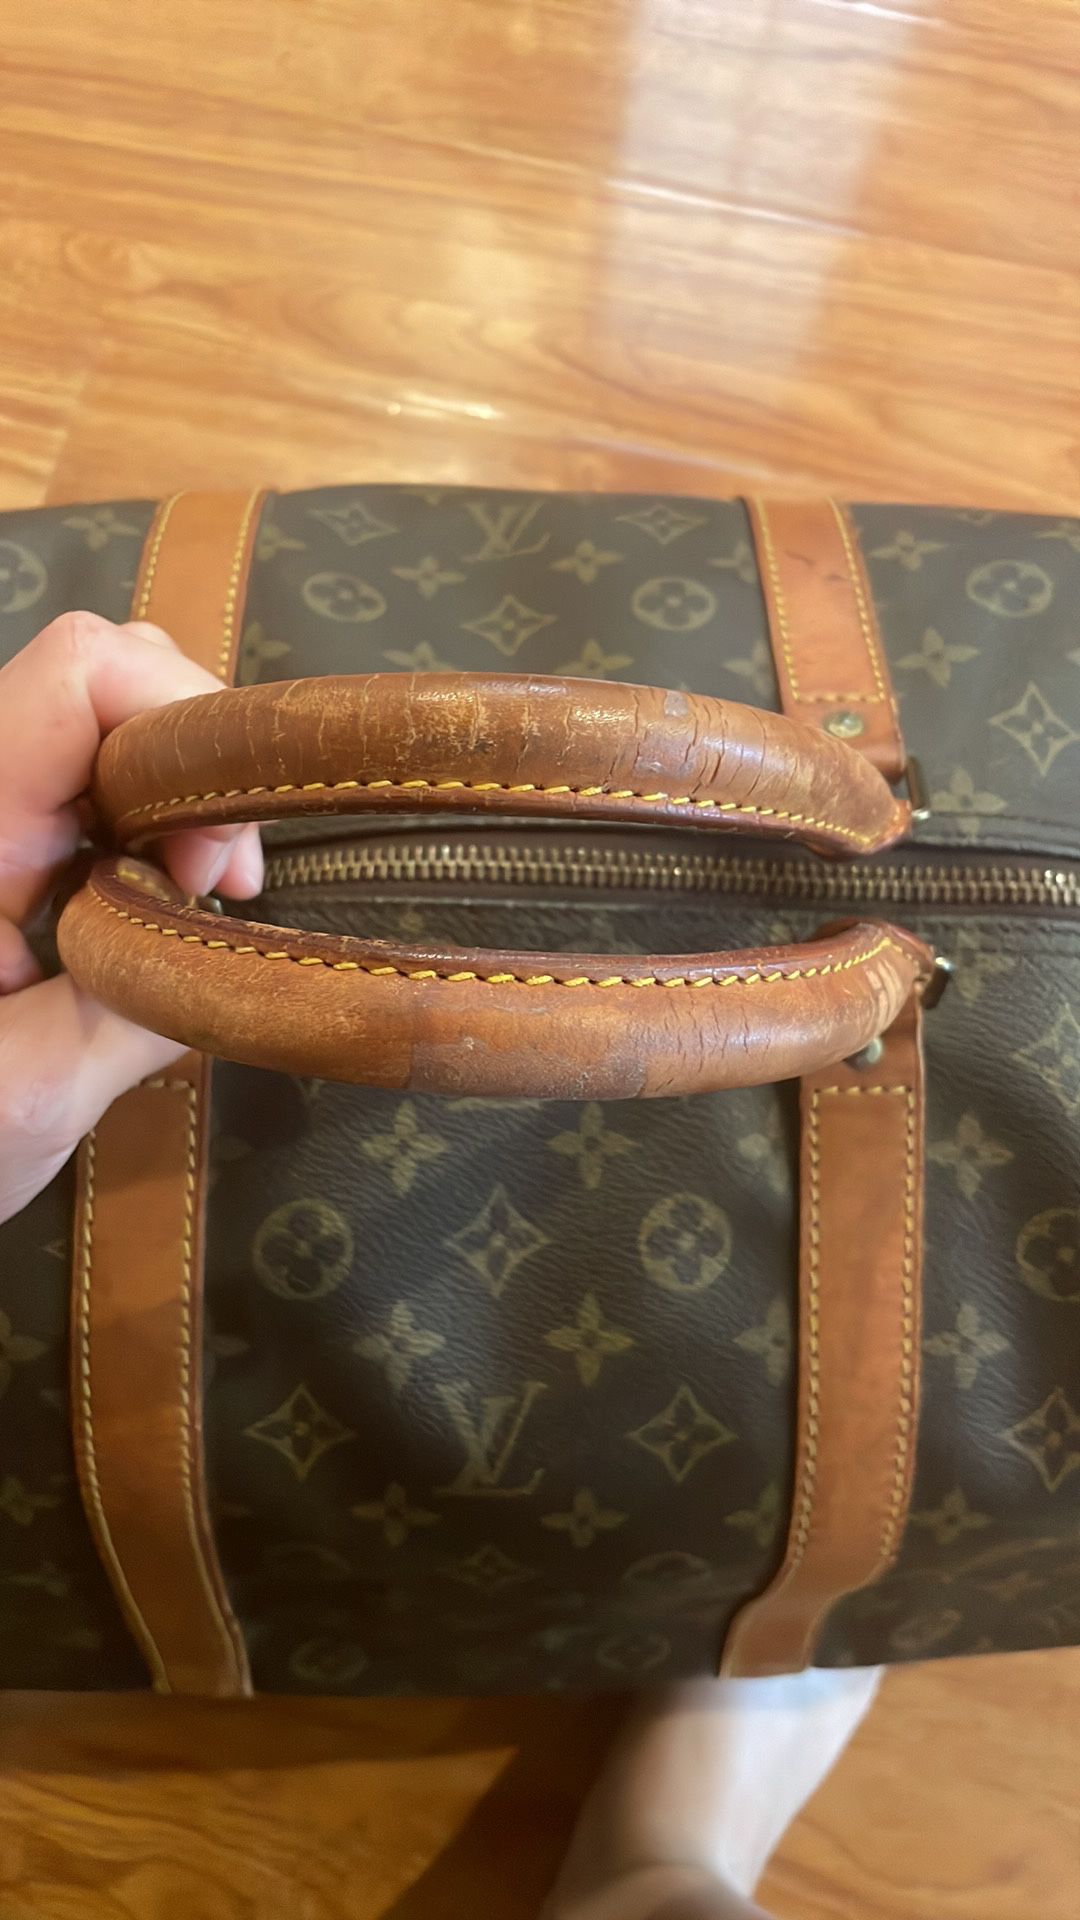 Louis Vuitton Black Duffel Bag Perfect For Traveling for Sale in Stockton,  CA - OfferUp